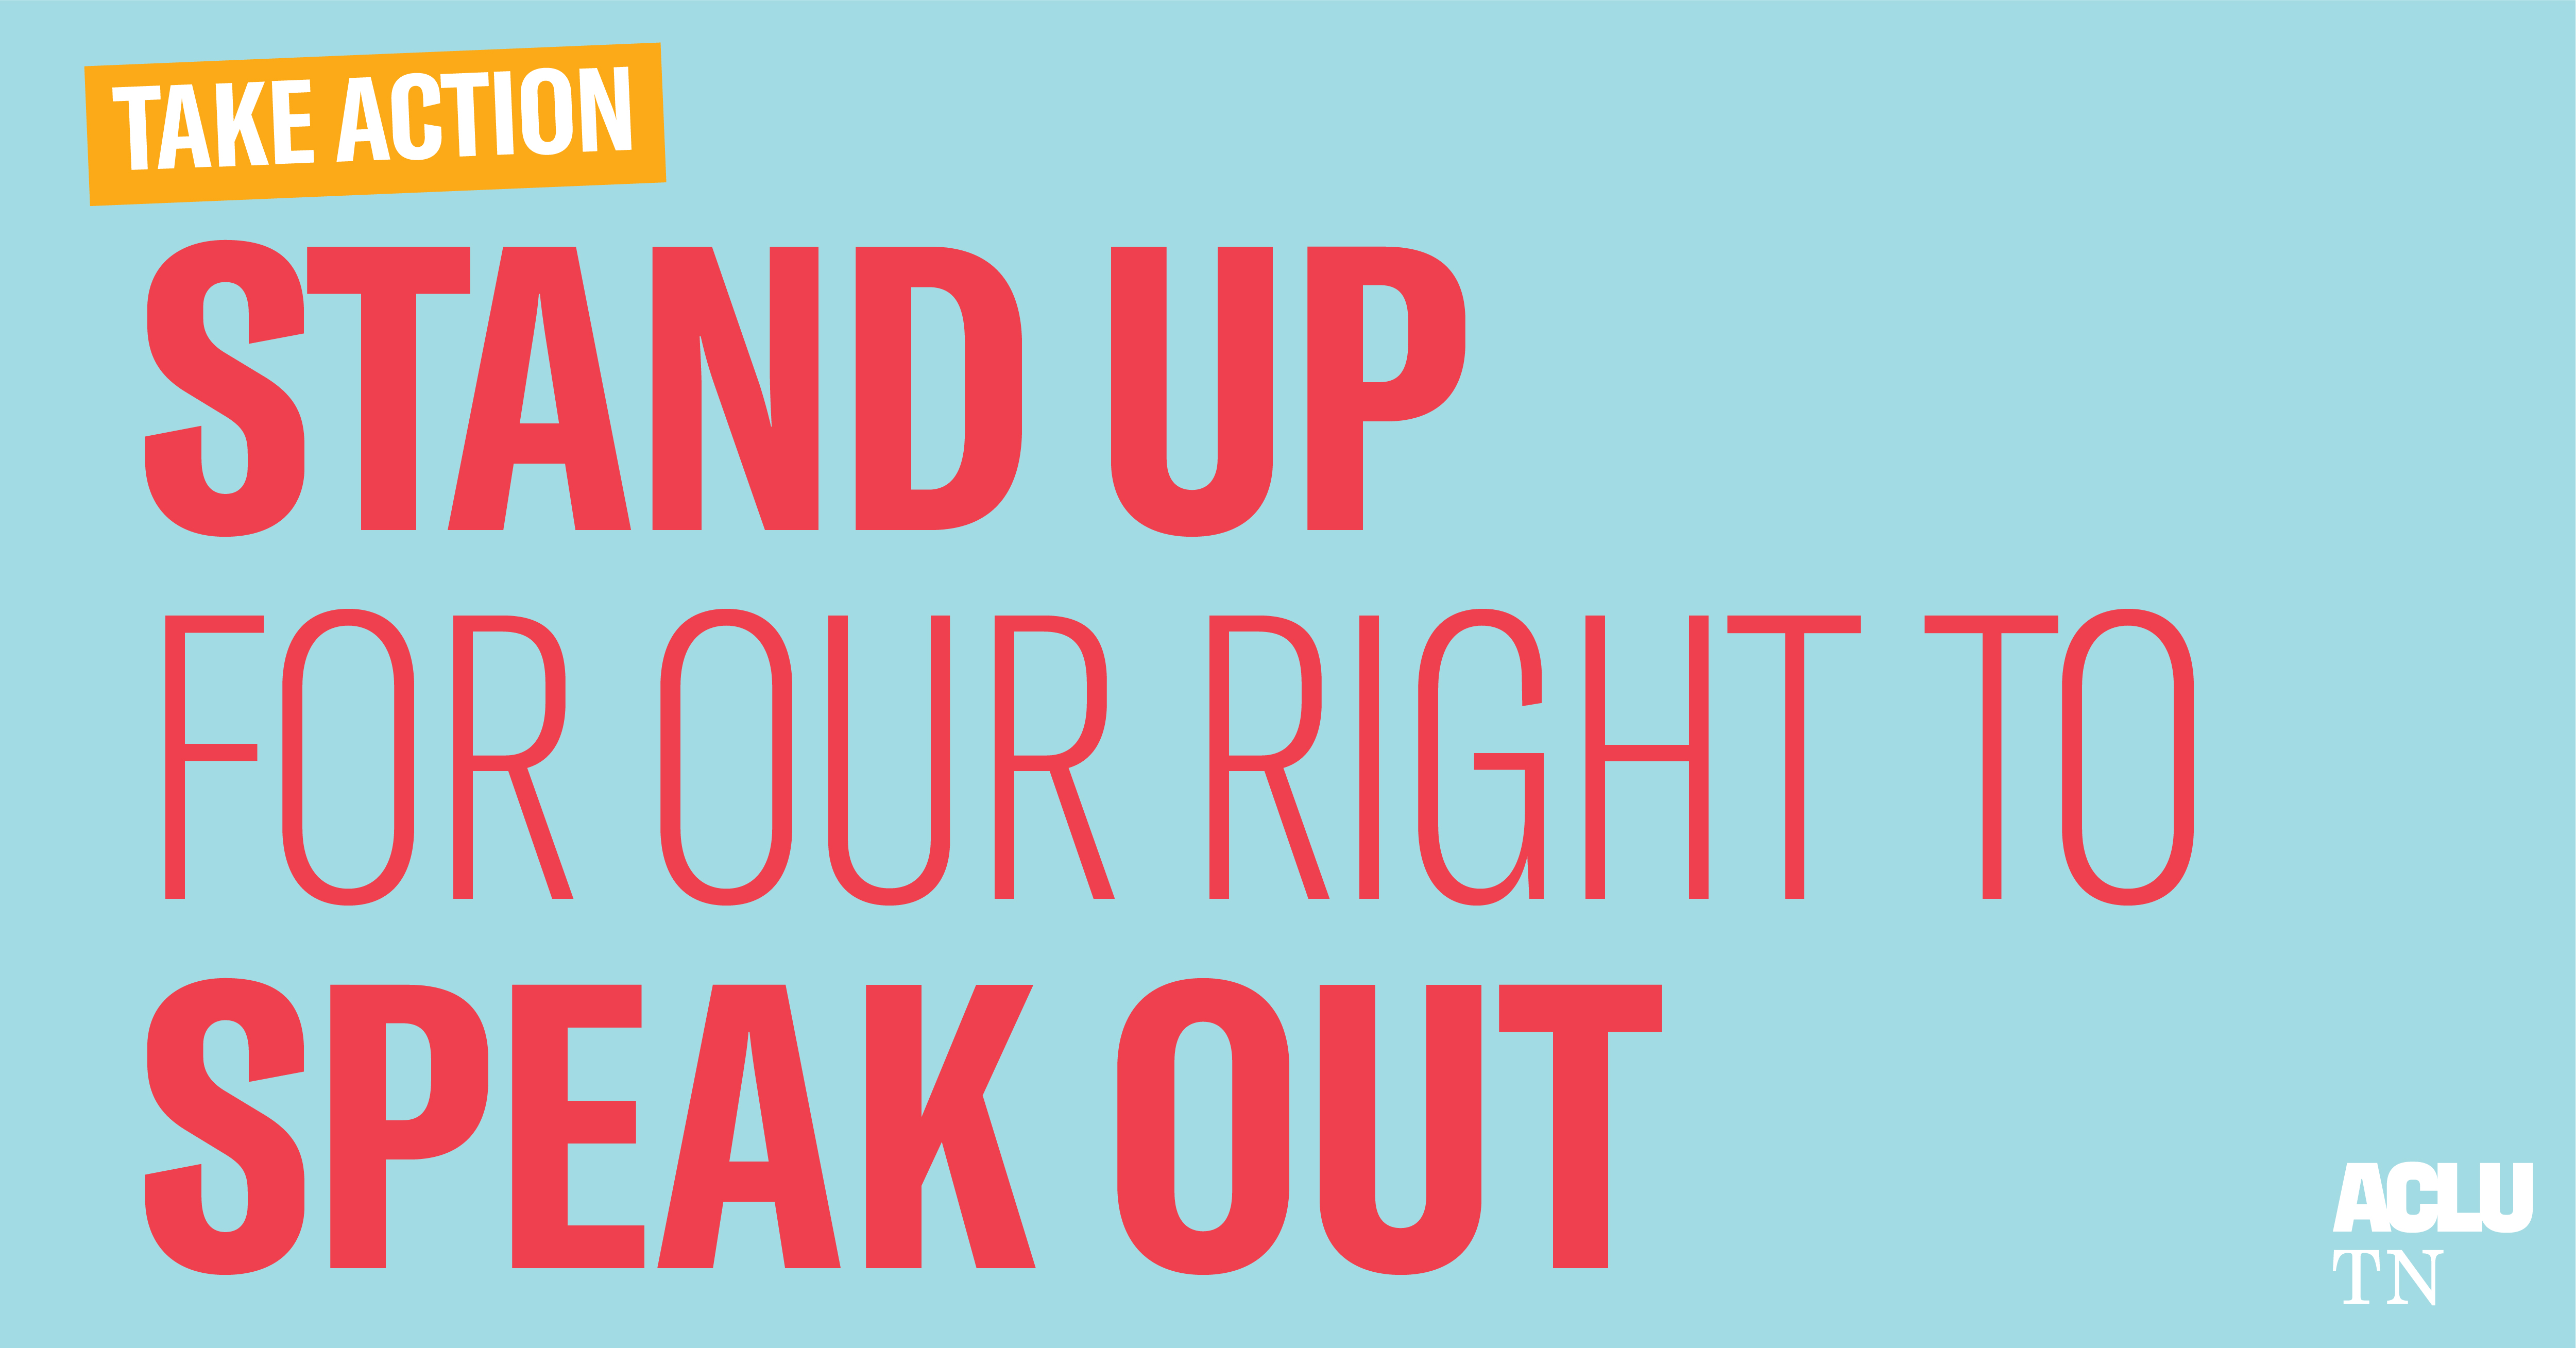 Stand up for the right to speak out